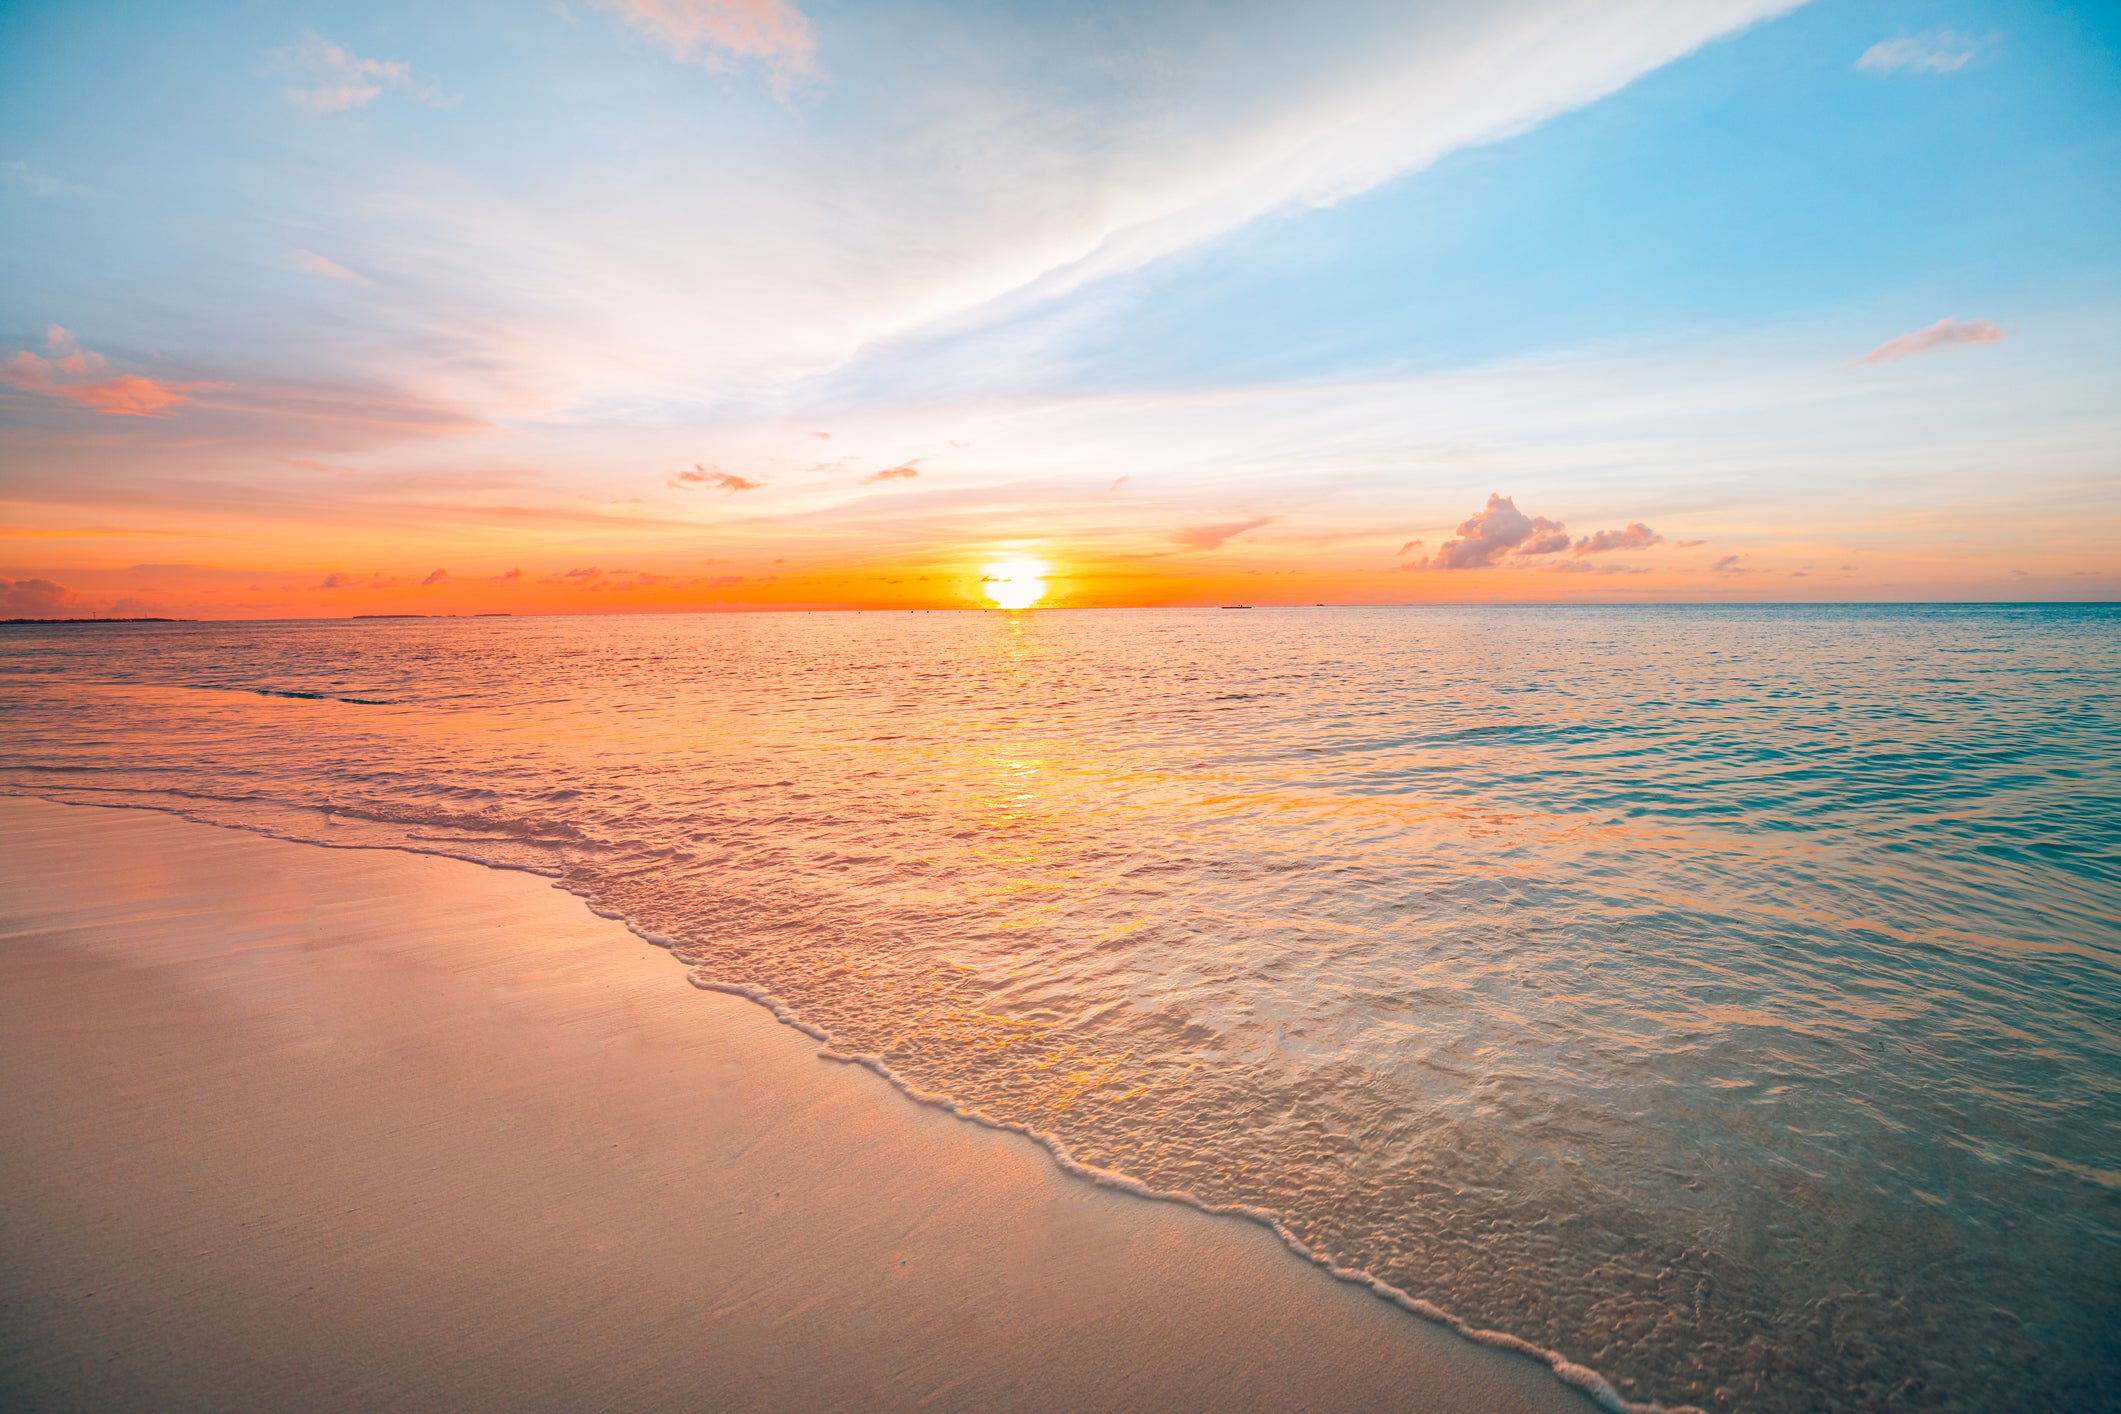 Sunset sea landscape. Colorful ocean beach sunrise. Beautiful beach scenery with calm waves and soft sandy beach. Empty tropical landscape, horizon with scenic coast view. Colorful nature sea sky